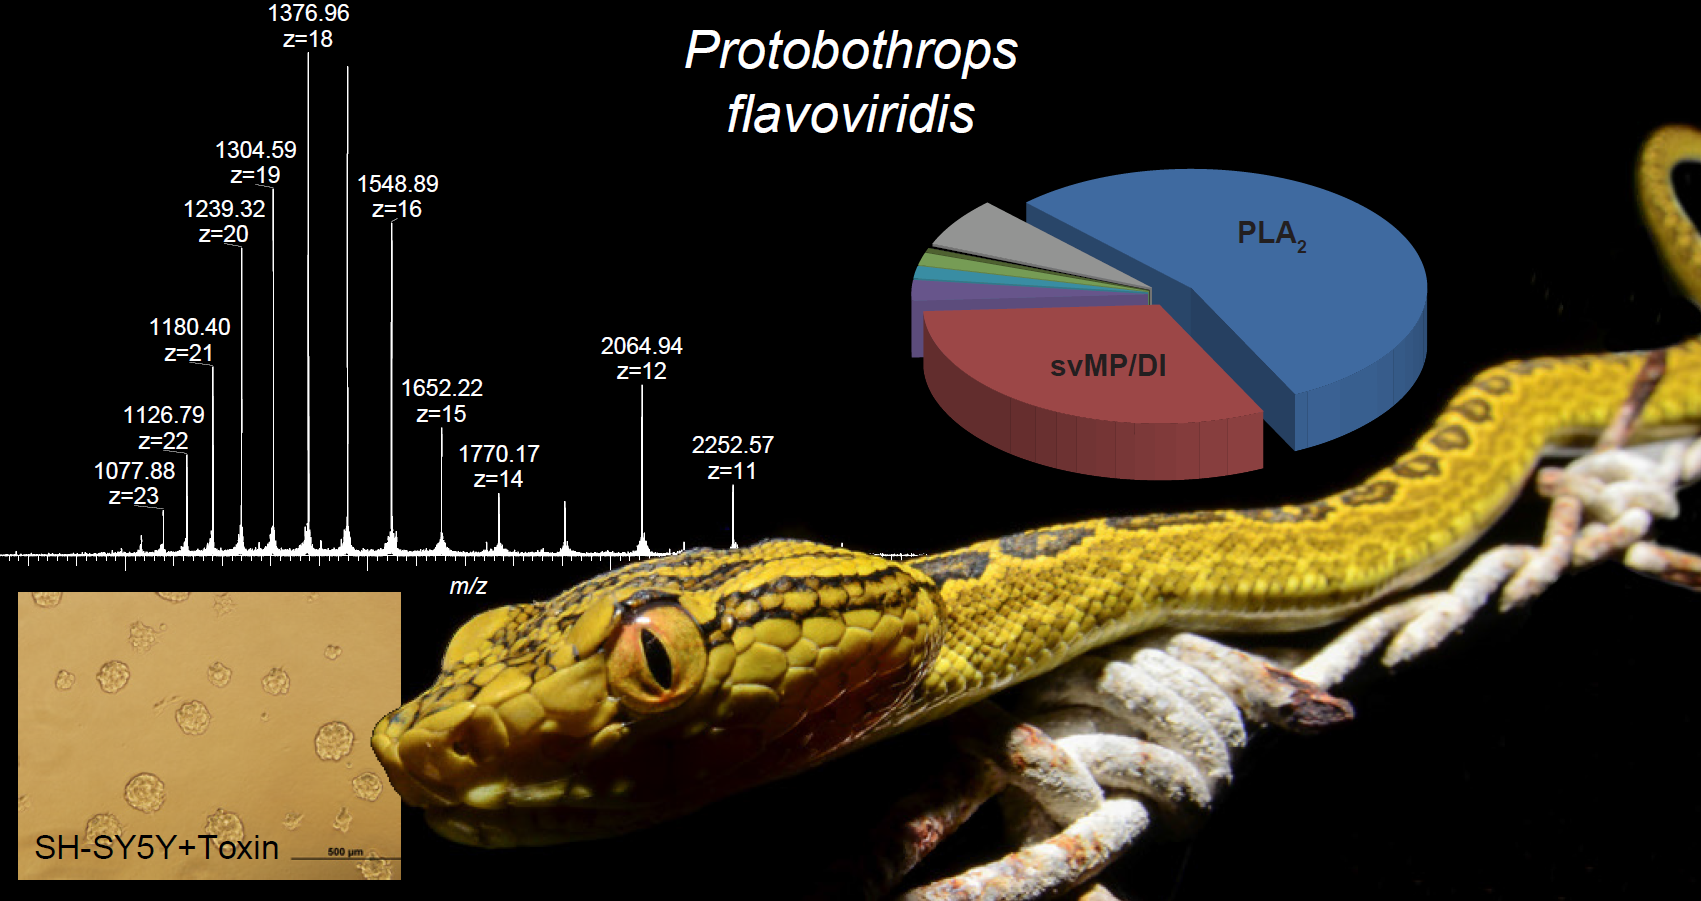 Comprehensive Snake Venomics Of The Okinawa Habu Pit Viper Protobothrops Flavoviridis By Complementary Mass Spectrometry Guided Approaches V1 Preprints